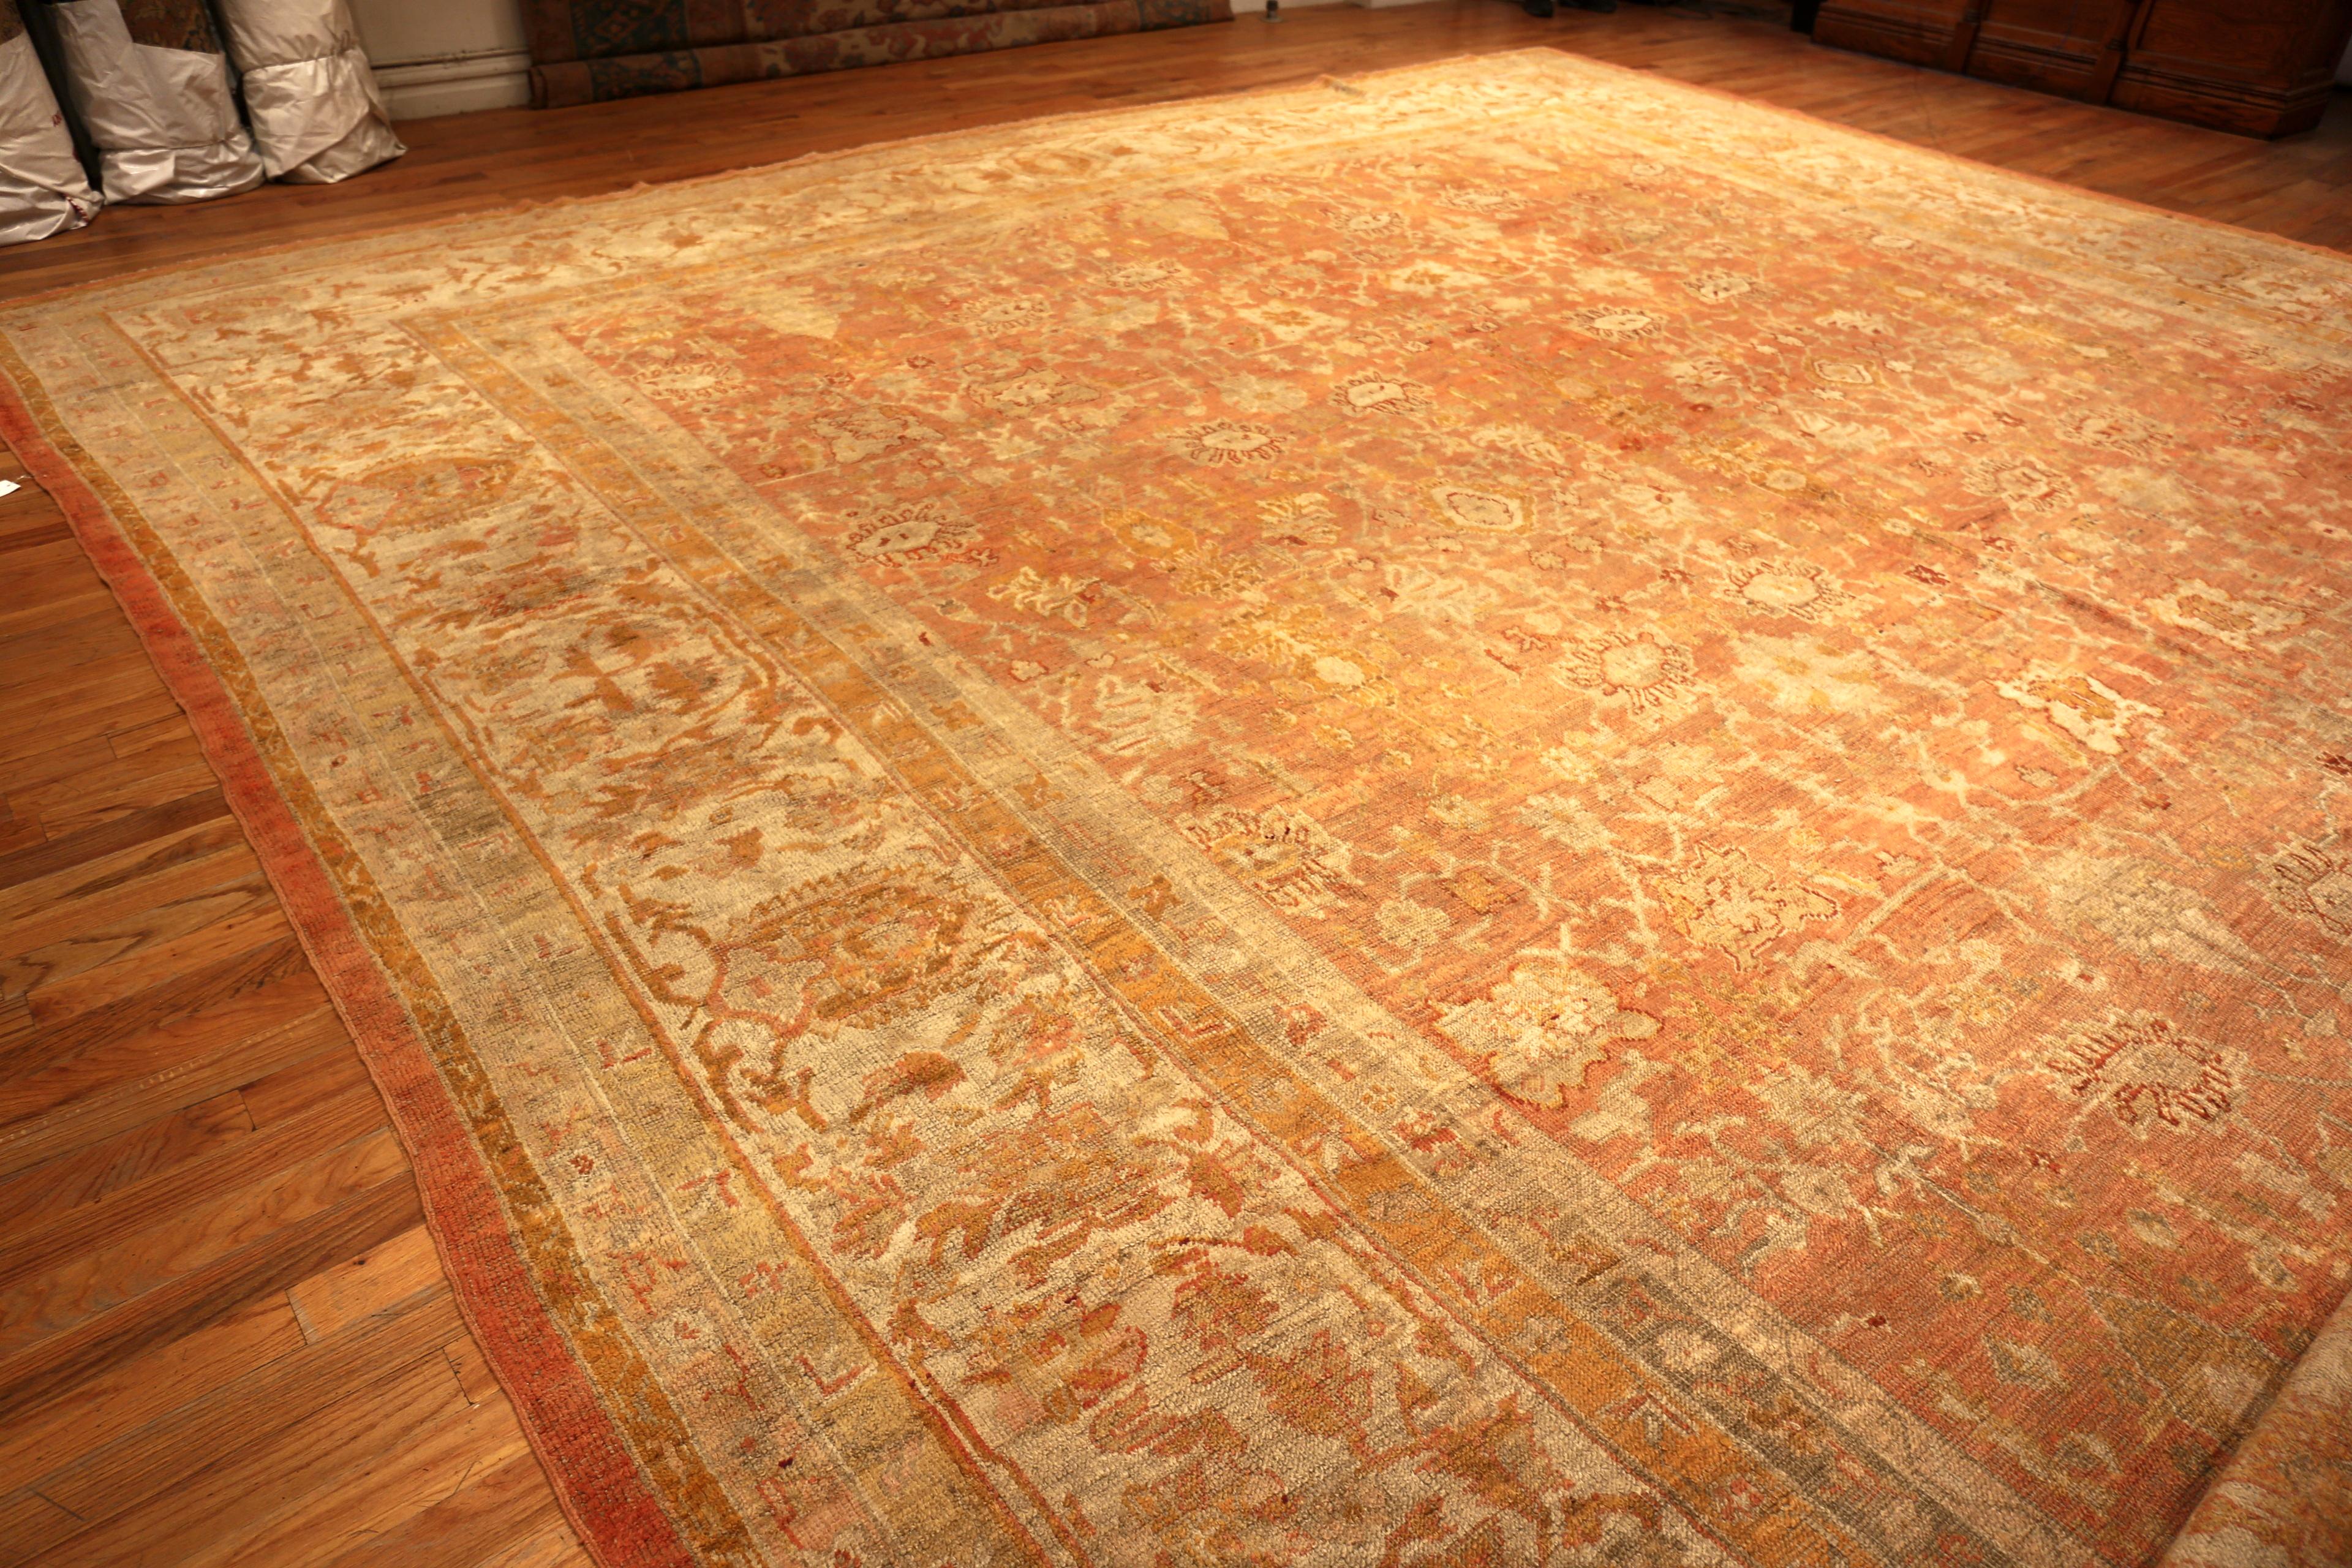 Oversized Decorative Antique Turkish Oushak Area Rug, Country of origin / rug type: Turkish rugs, Circa date: 1900. Size: 20 ft x 26 ft 6 in (6.1 m x 8.08 m)
  